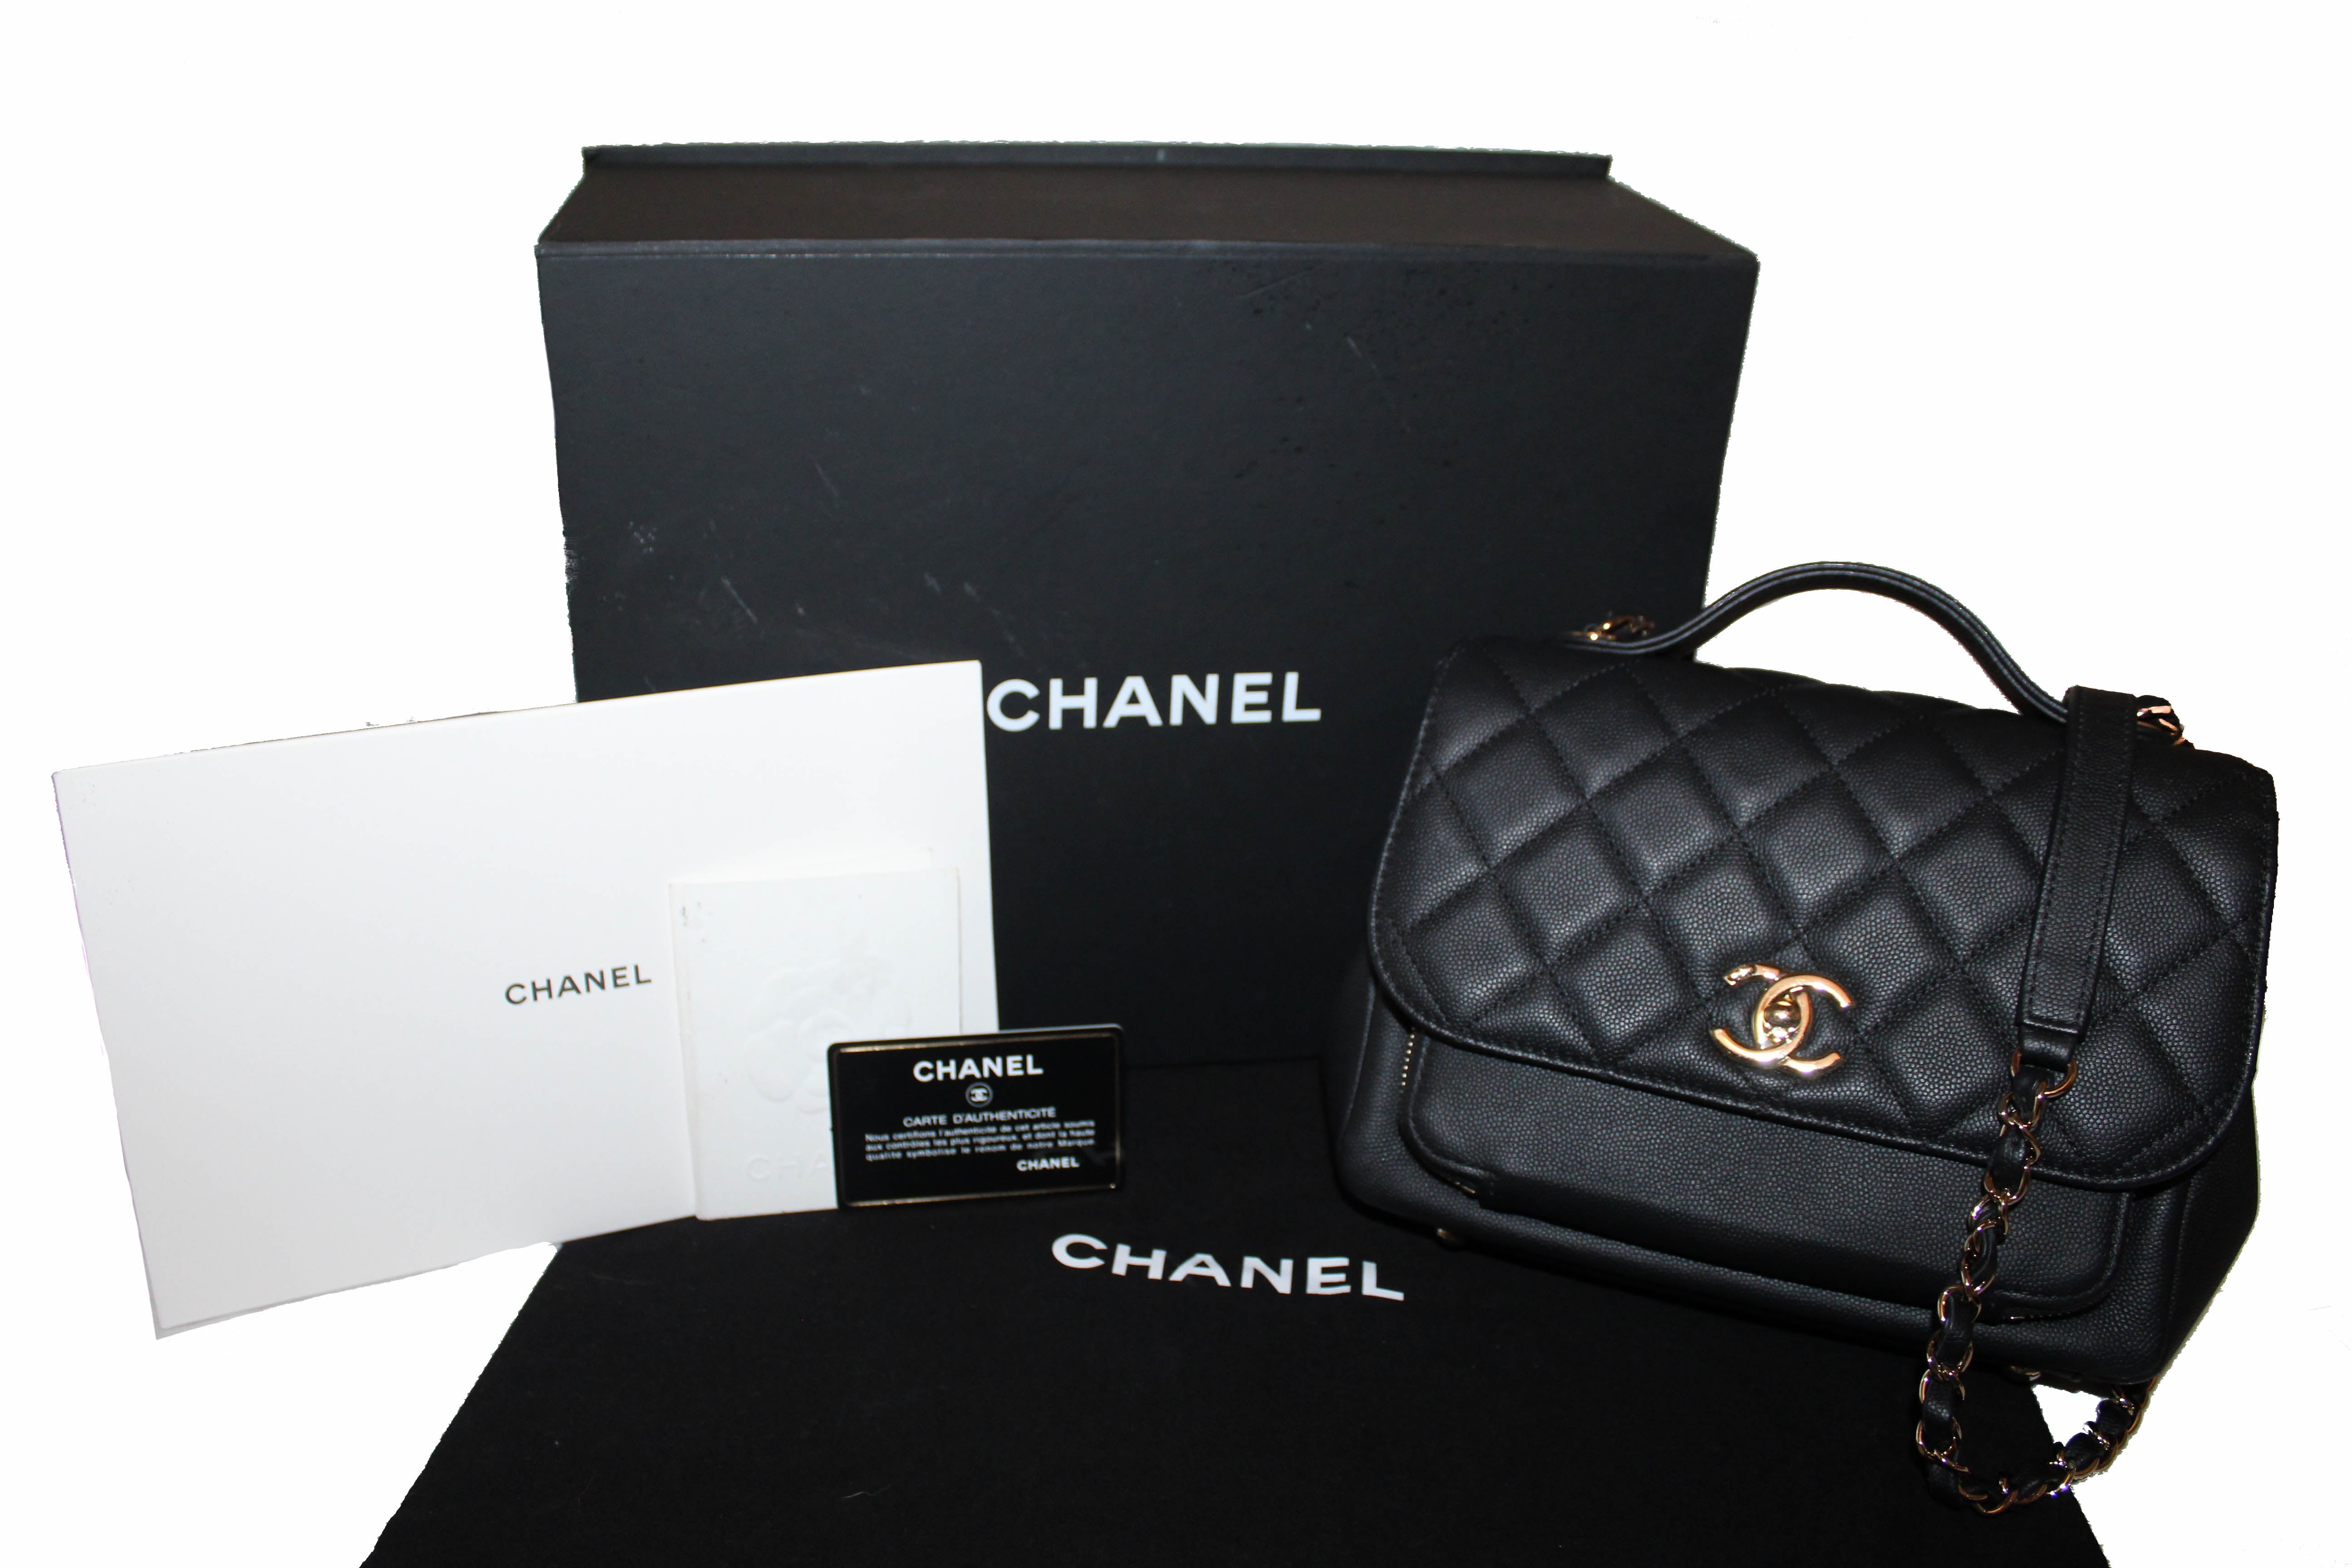 Authentic Chanel Black Caviar Leather Medium Business Affinity Flap Bag with Top Handle Messenger Bag